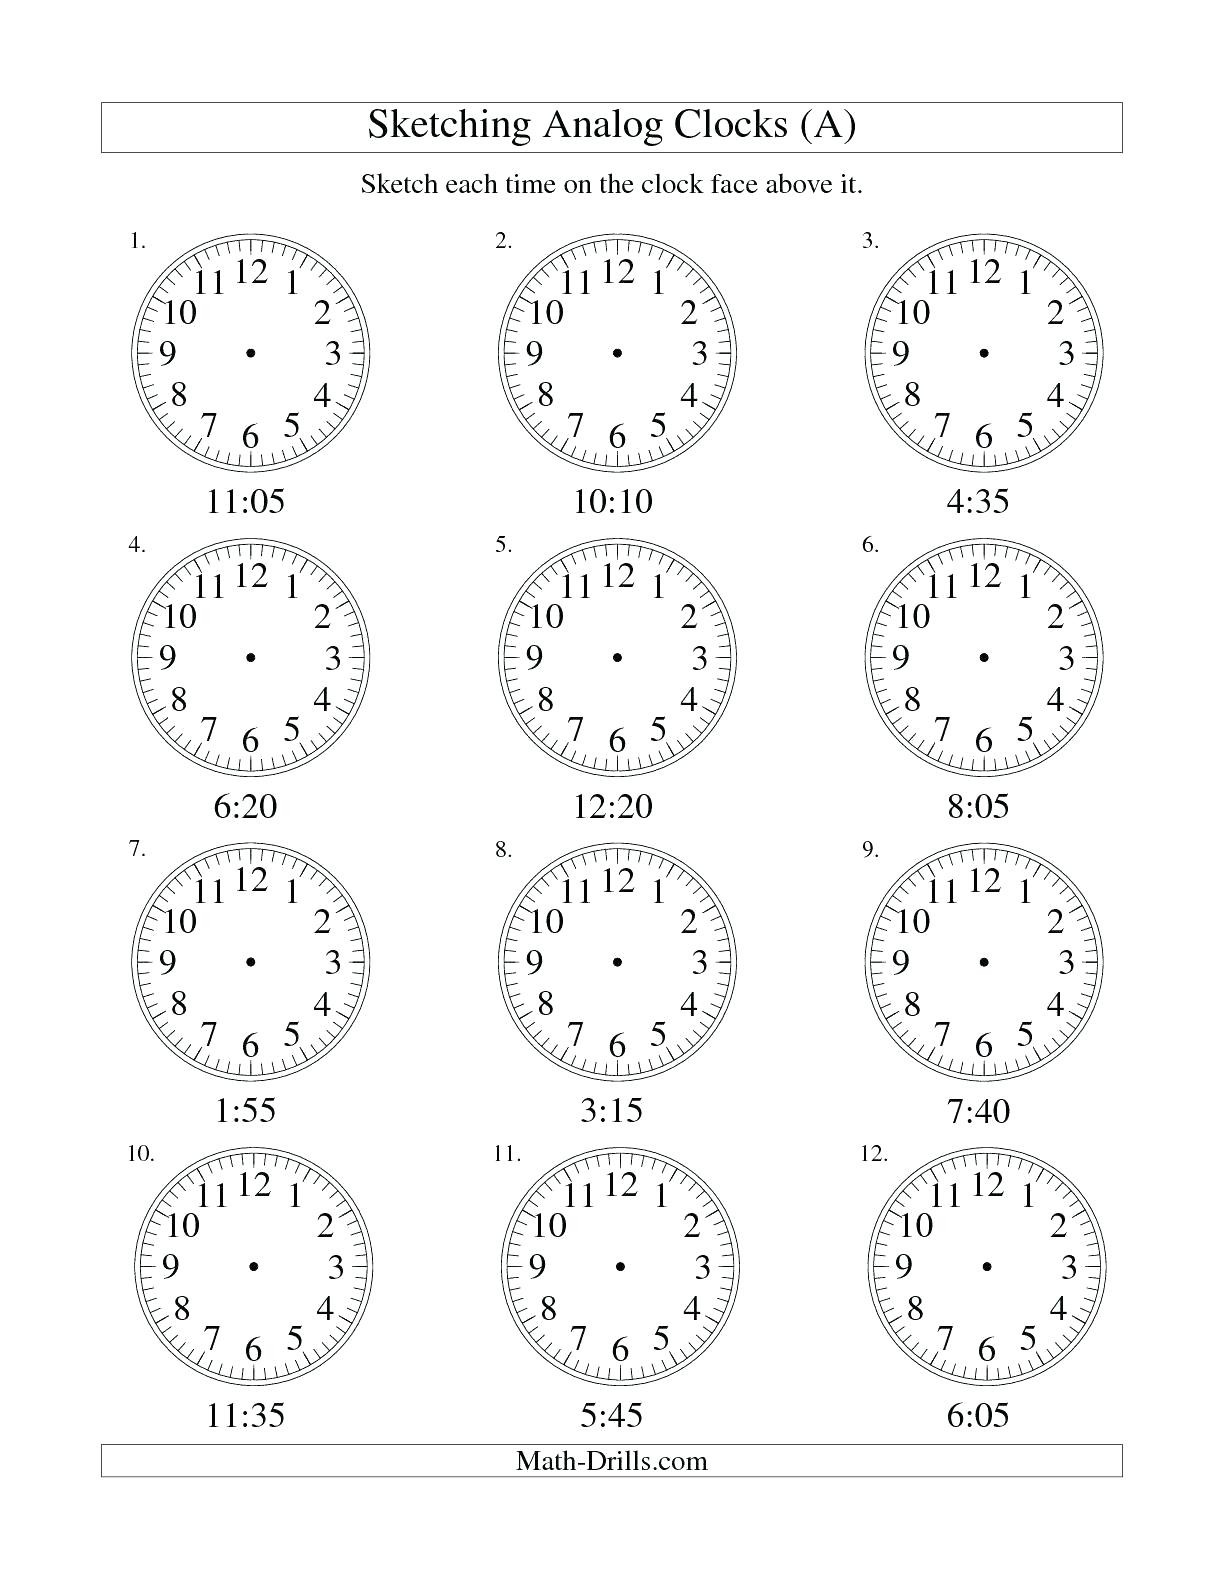 Free Math Worksheets Second Grade 2 Addition Adding 2 Single Digit Numbers